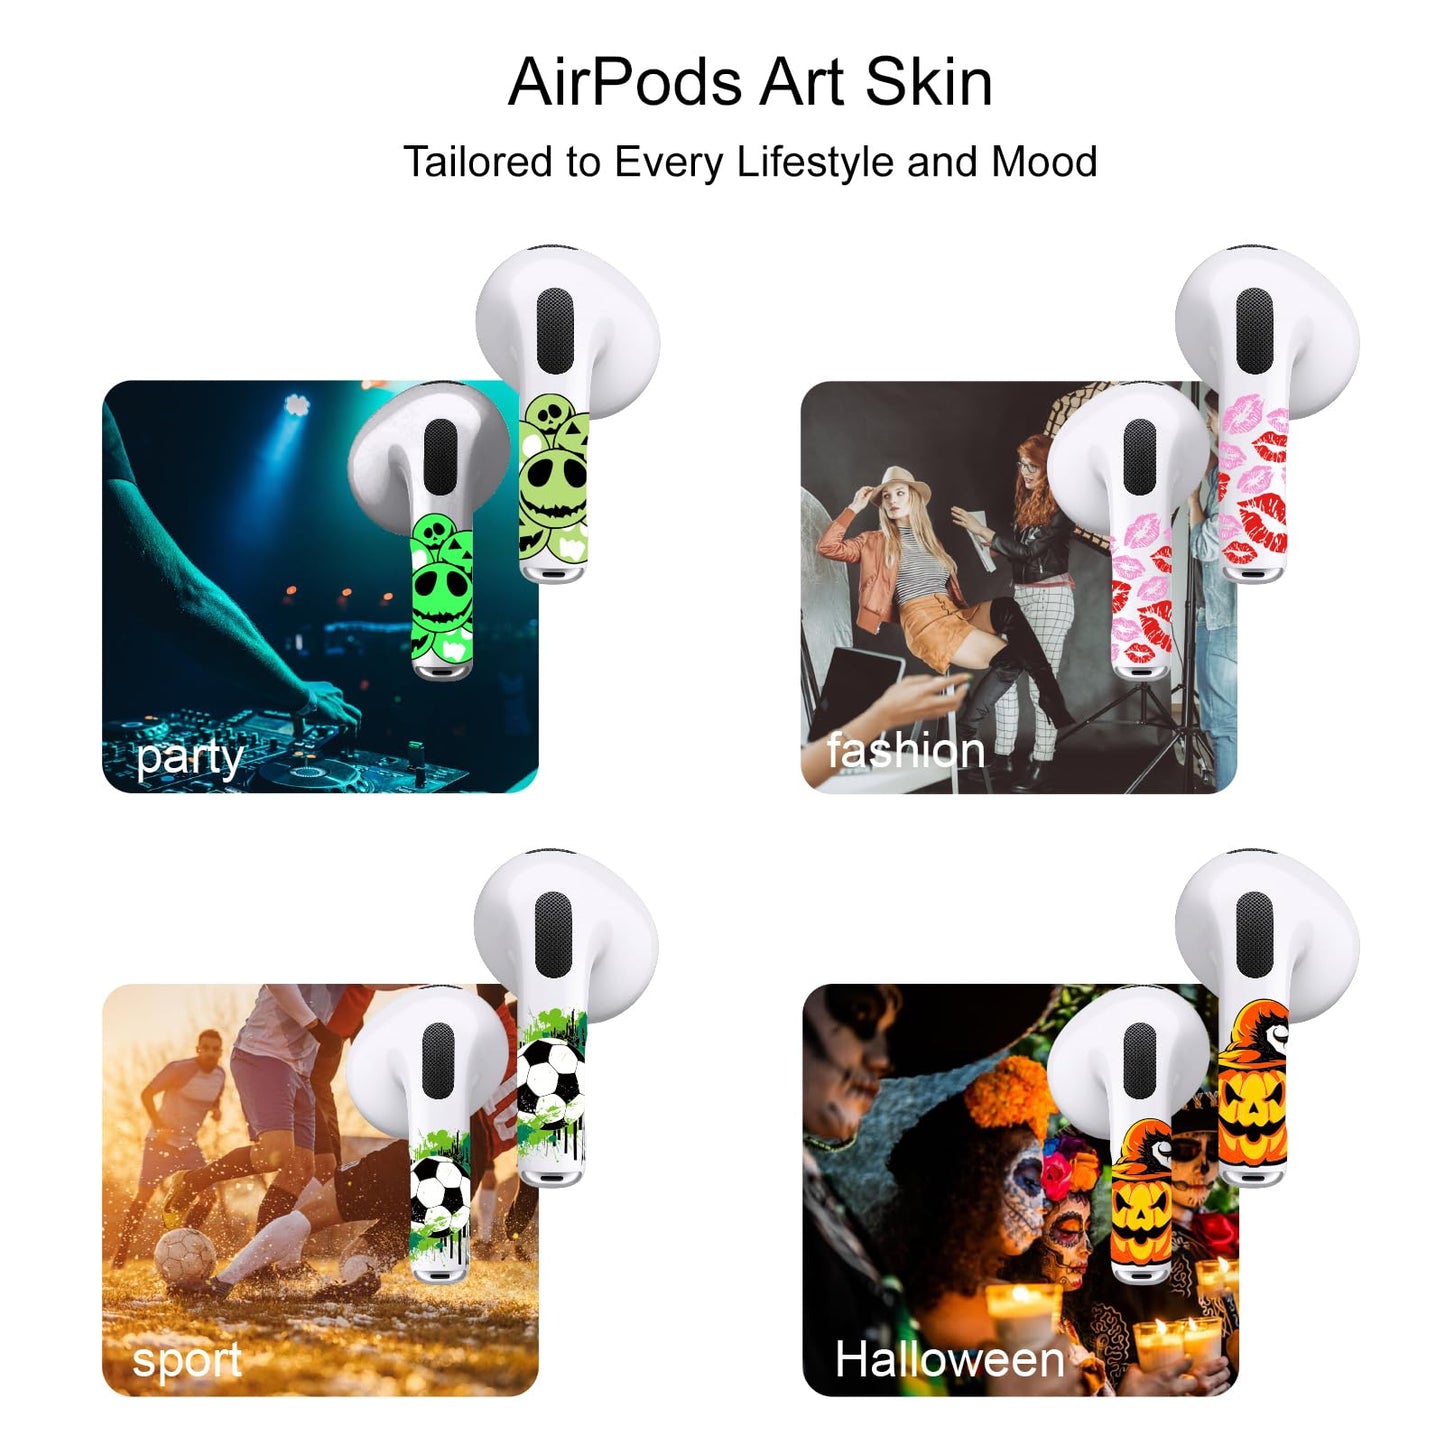 ROCKMAX for AirPods 3rd Generation Skin Accessories, Brown Teddy Bear Decor Sticker Wrap for Men, Women, Boys and Girls Gift, Unique Tattoos Compatible to AirPods Gen 3 Case Cover